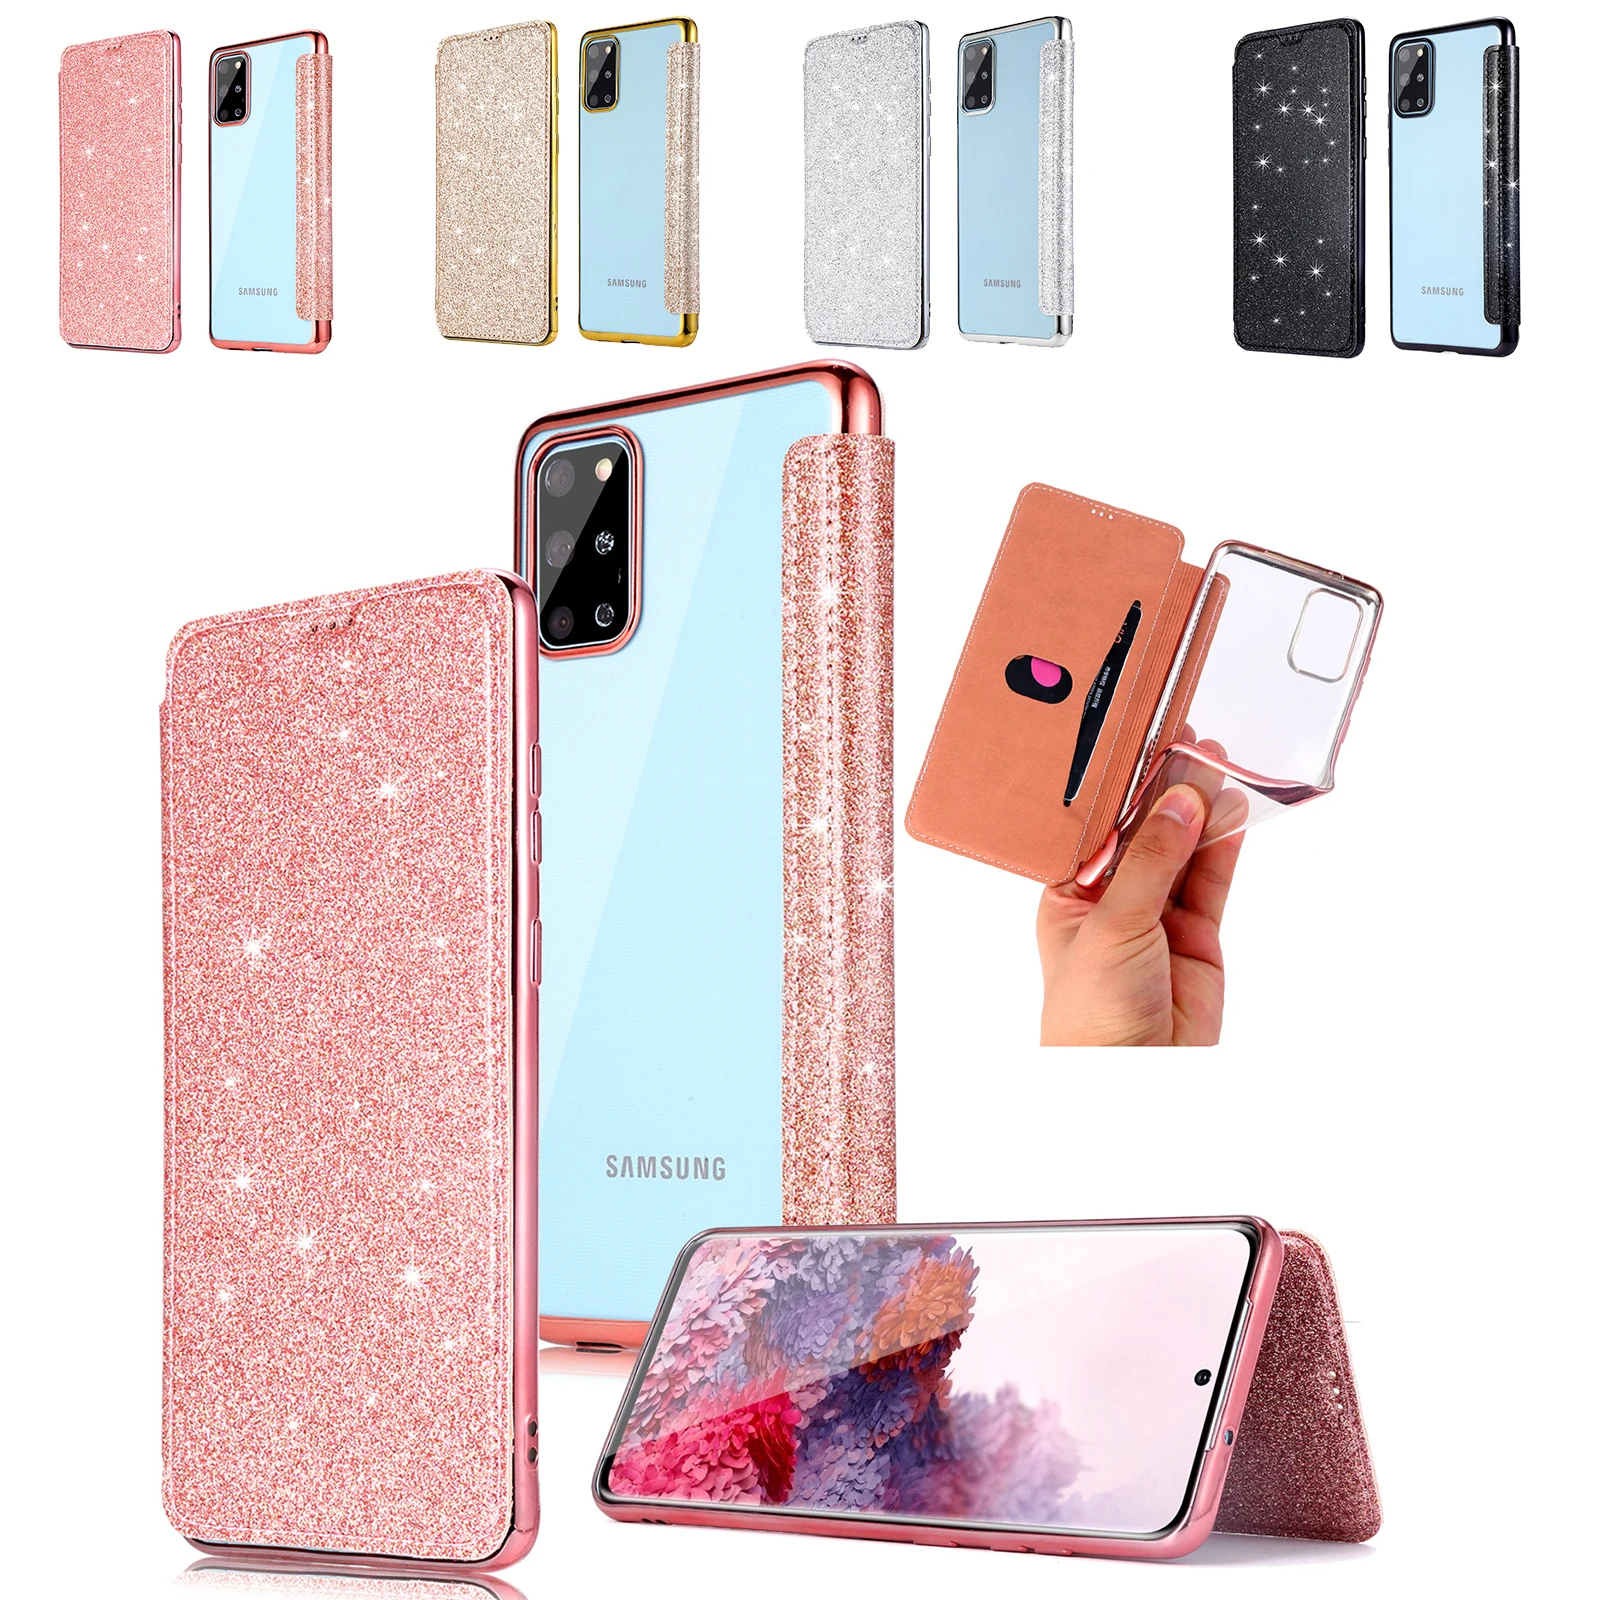 

Bracket Flap For Samsung Galaxy Phones Case Cover S10 S10E S10Plus S9Plus S8 S8Plus S7 S7edge S6 S6edge Note10 Note10Plus Note9